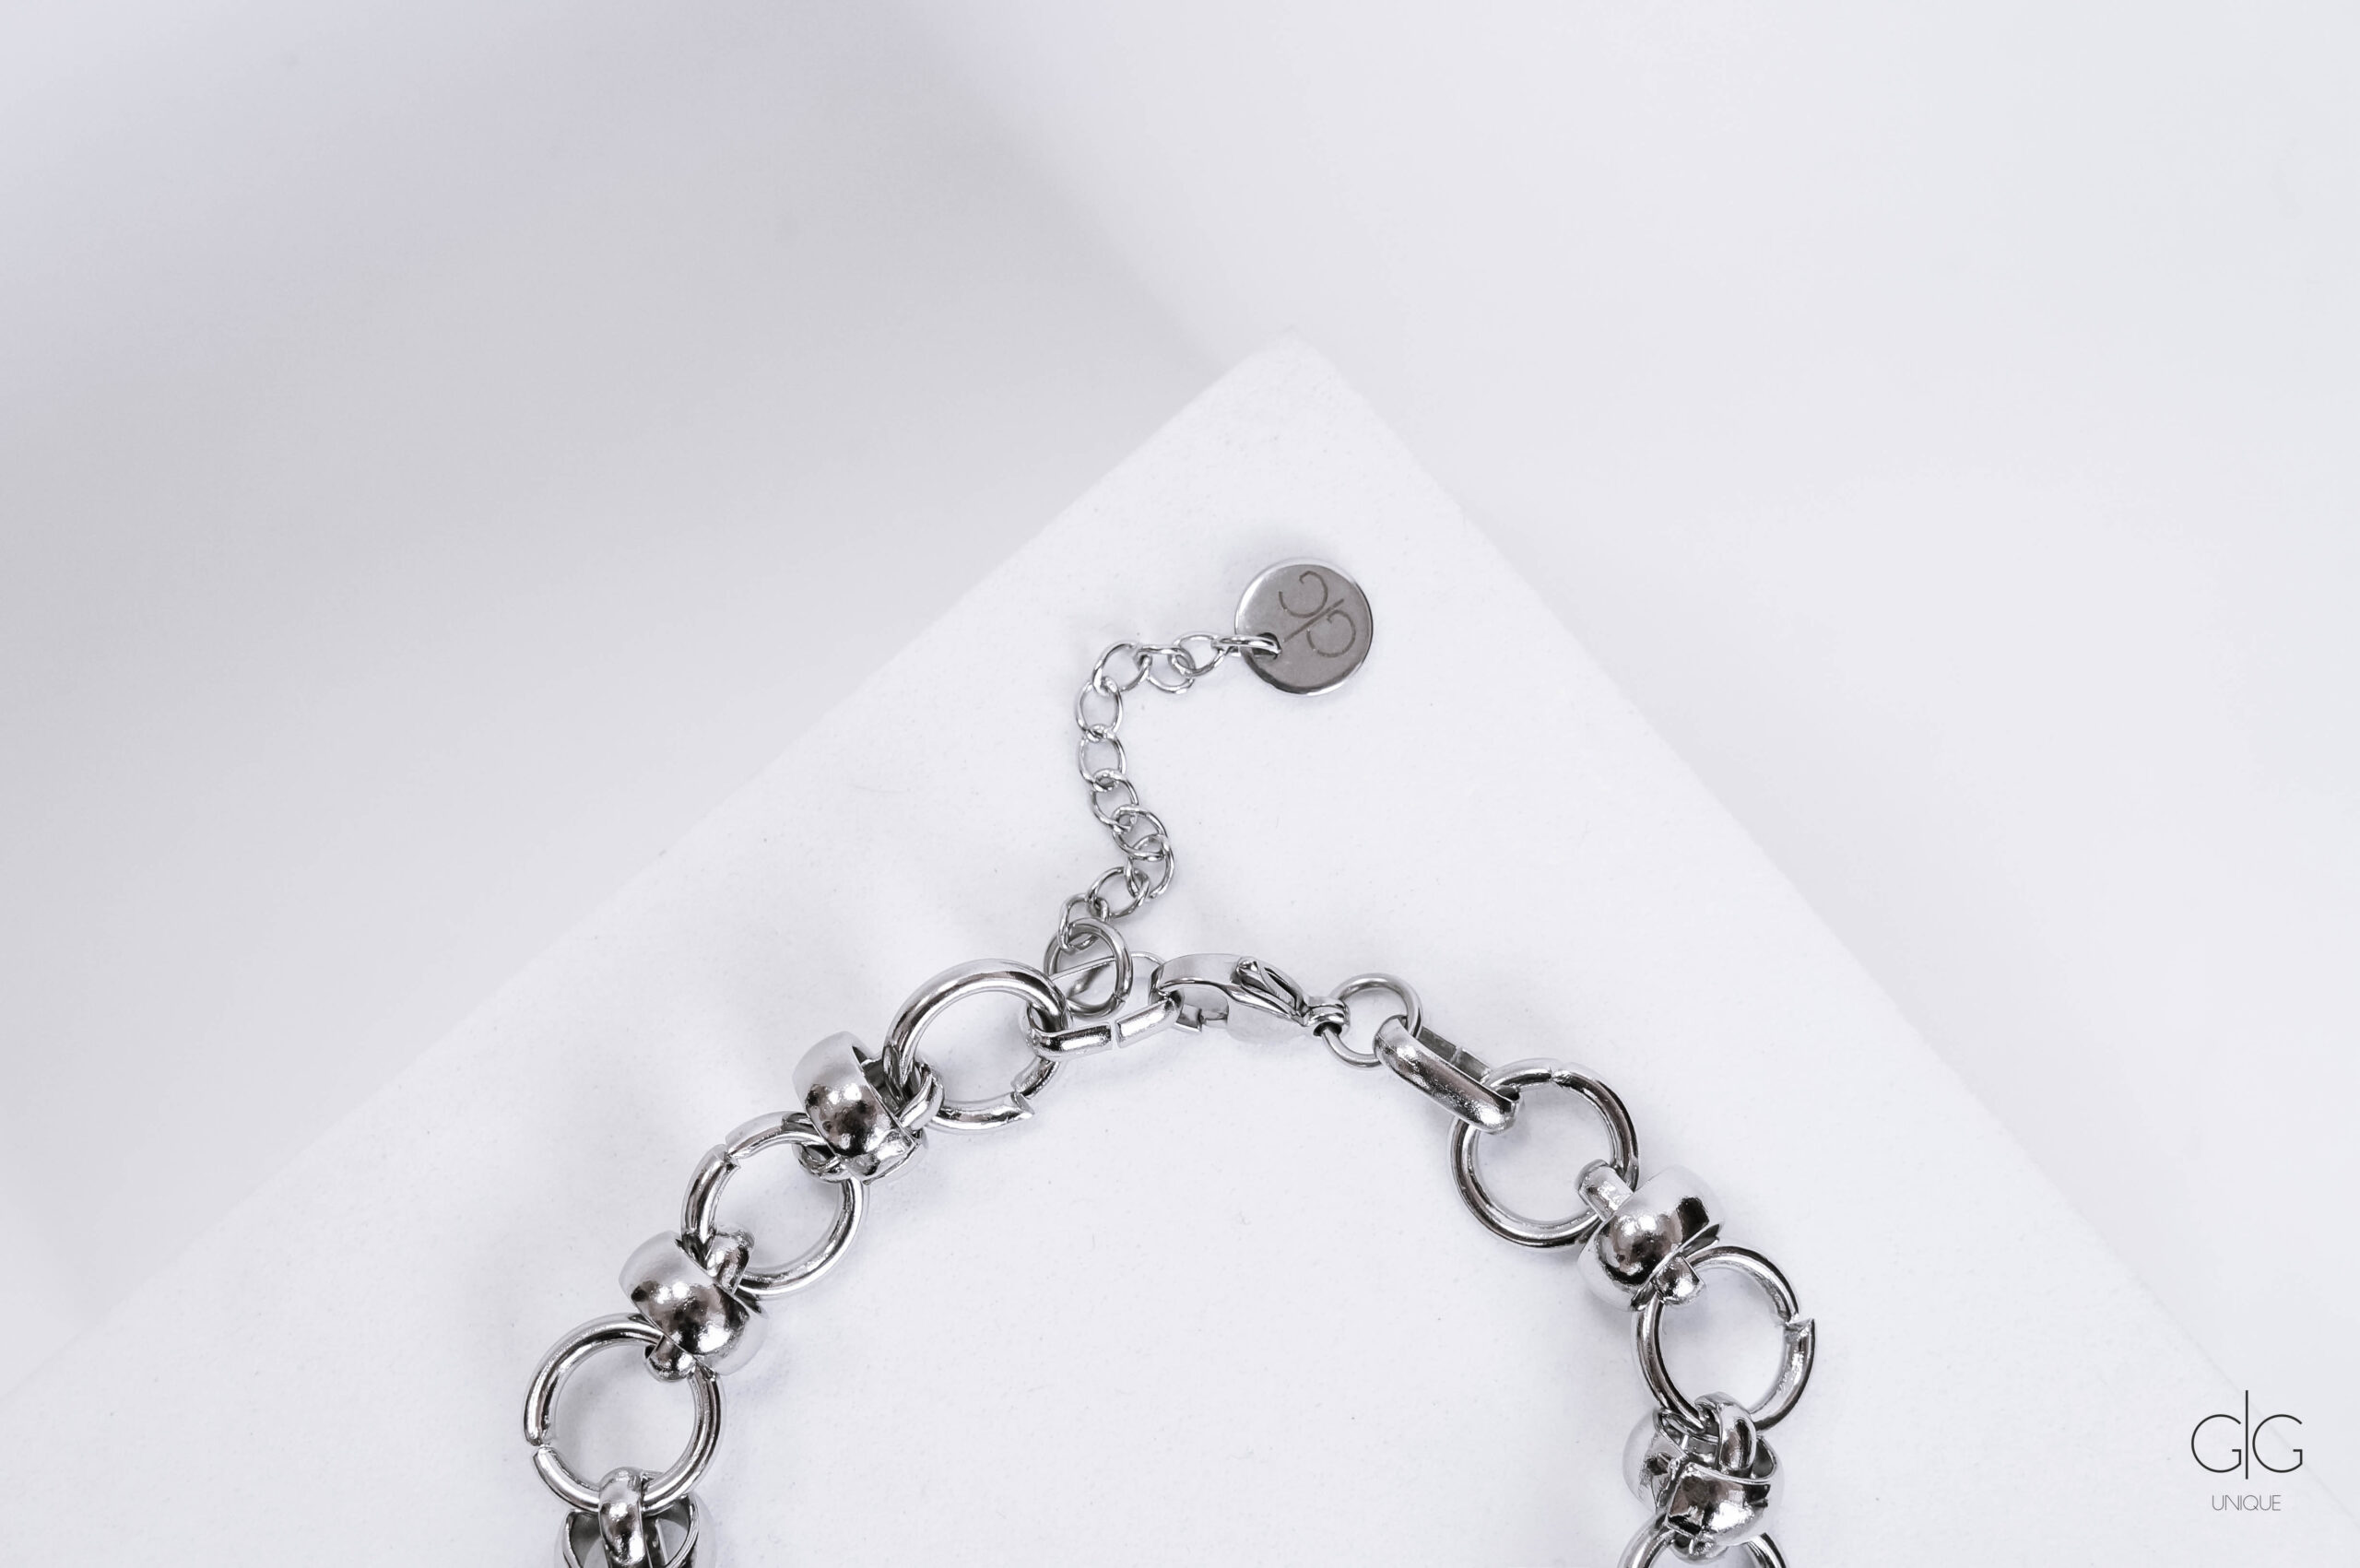 Stainless steel chain bracelet - GG UNIQUE